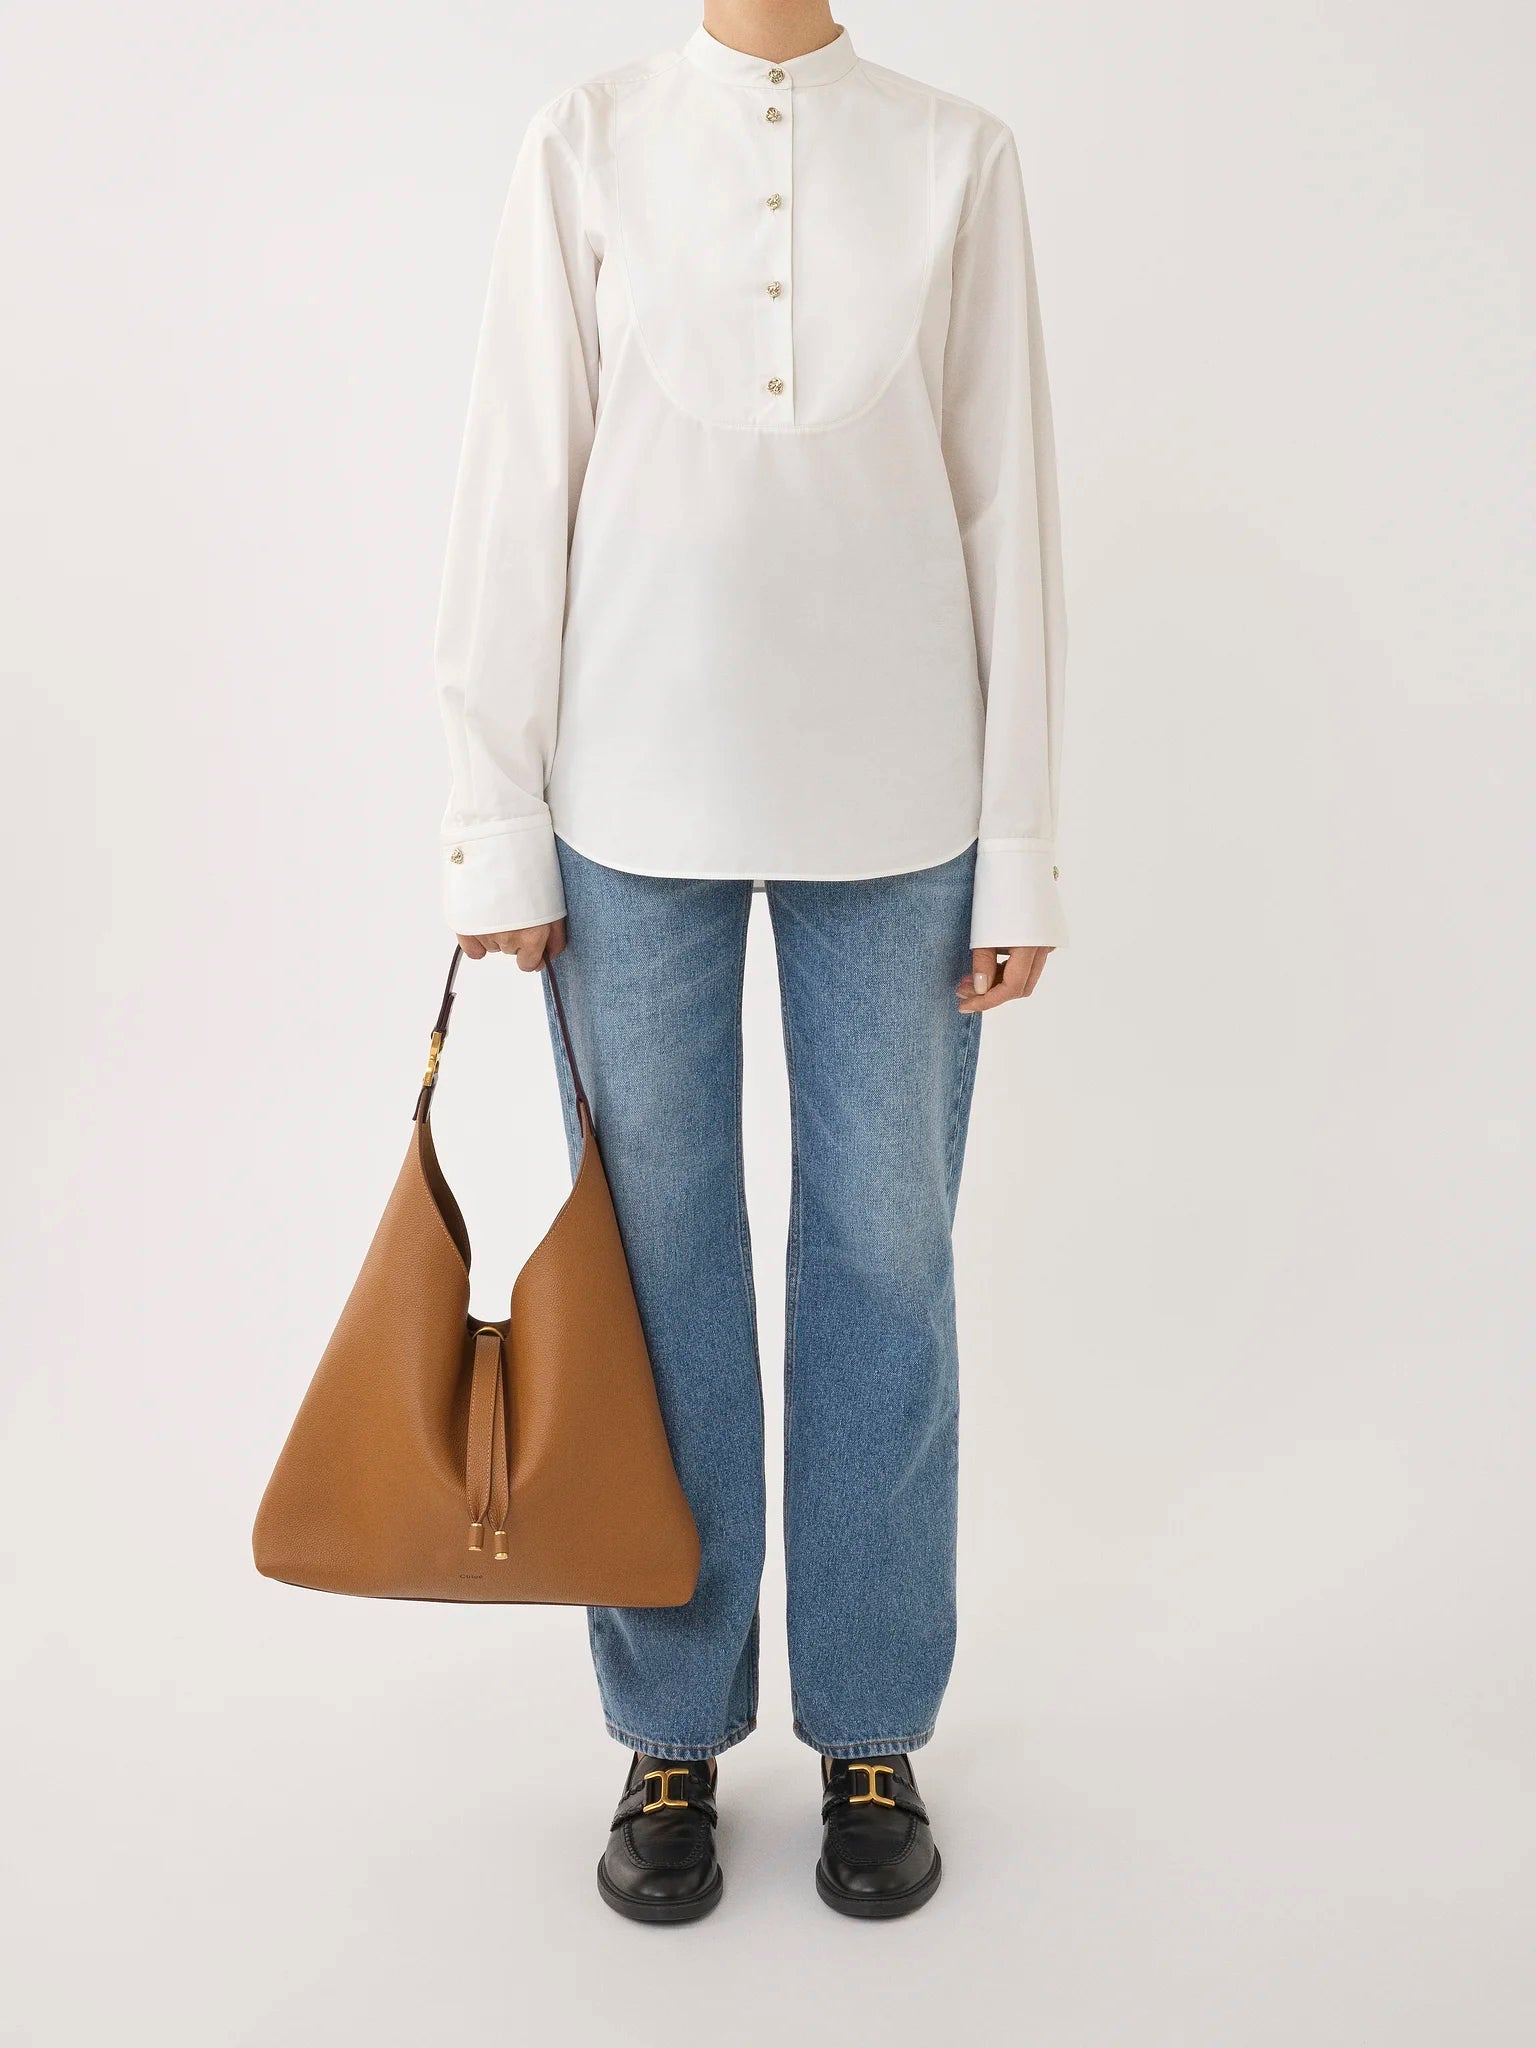 The Chloe Marcie Hobo Bag in Pottery Brown available at The New Trend Australia